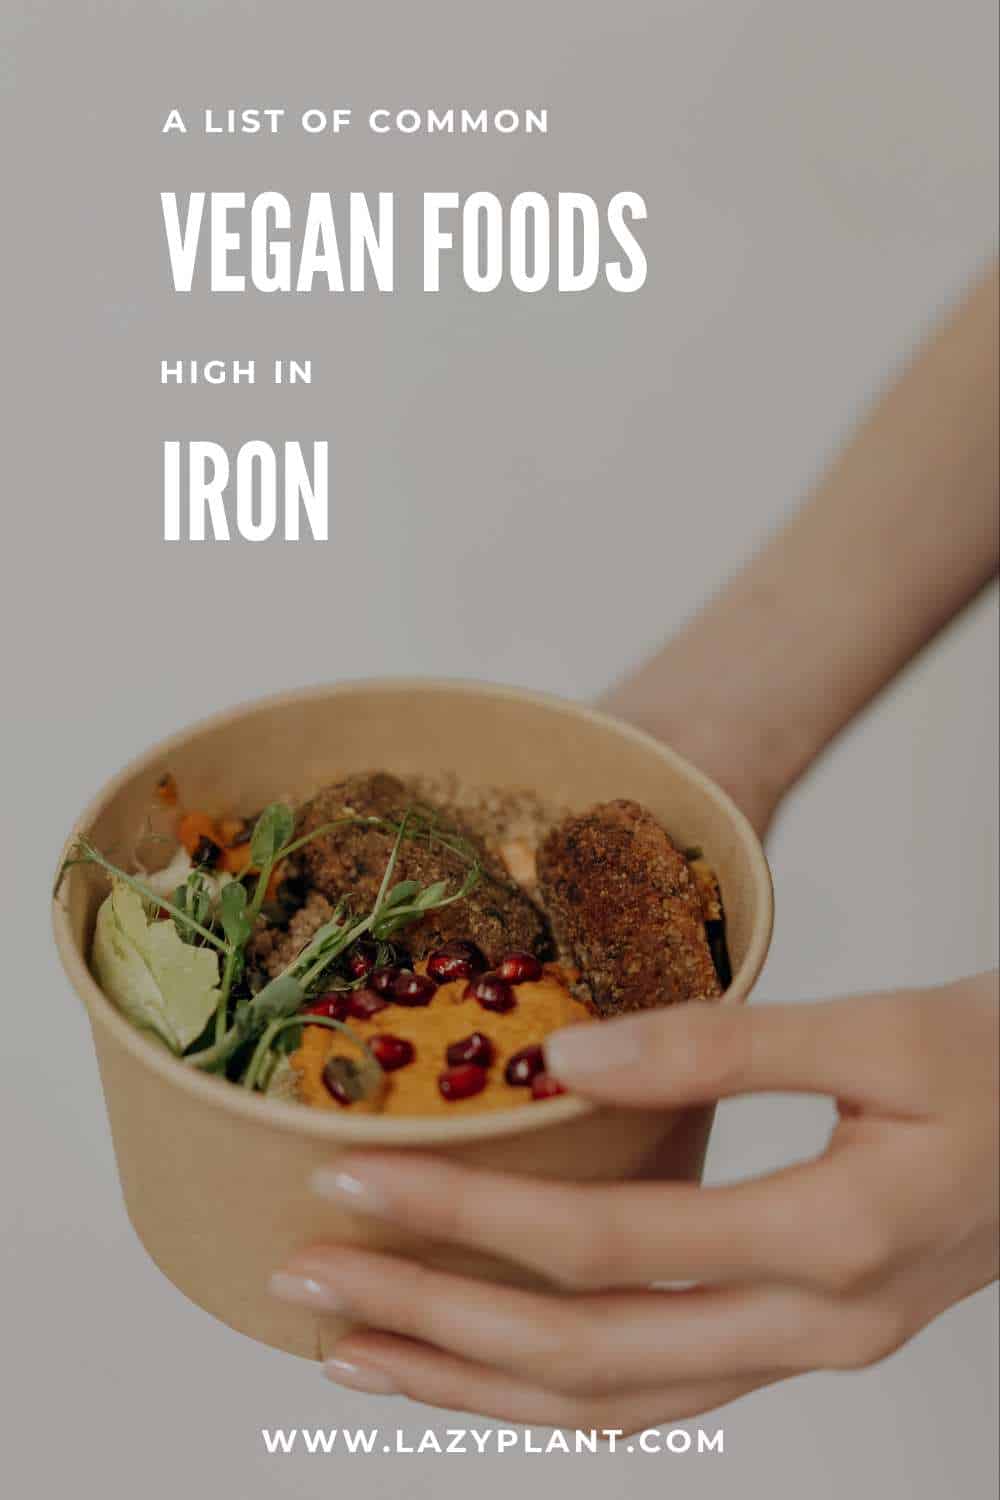 A list of common vegan foods naturally rich in iron!